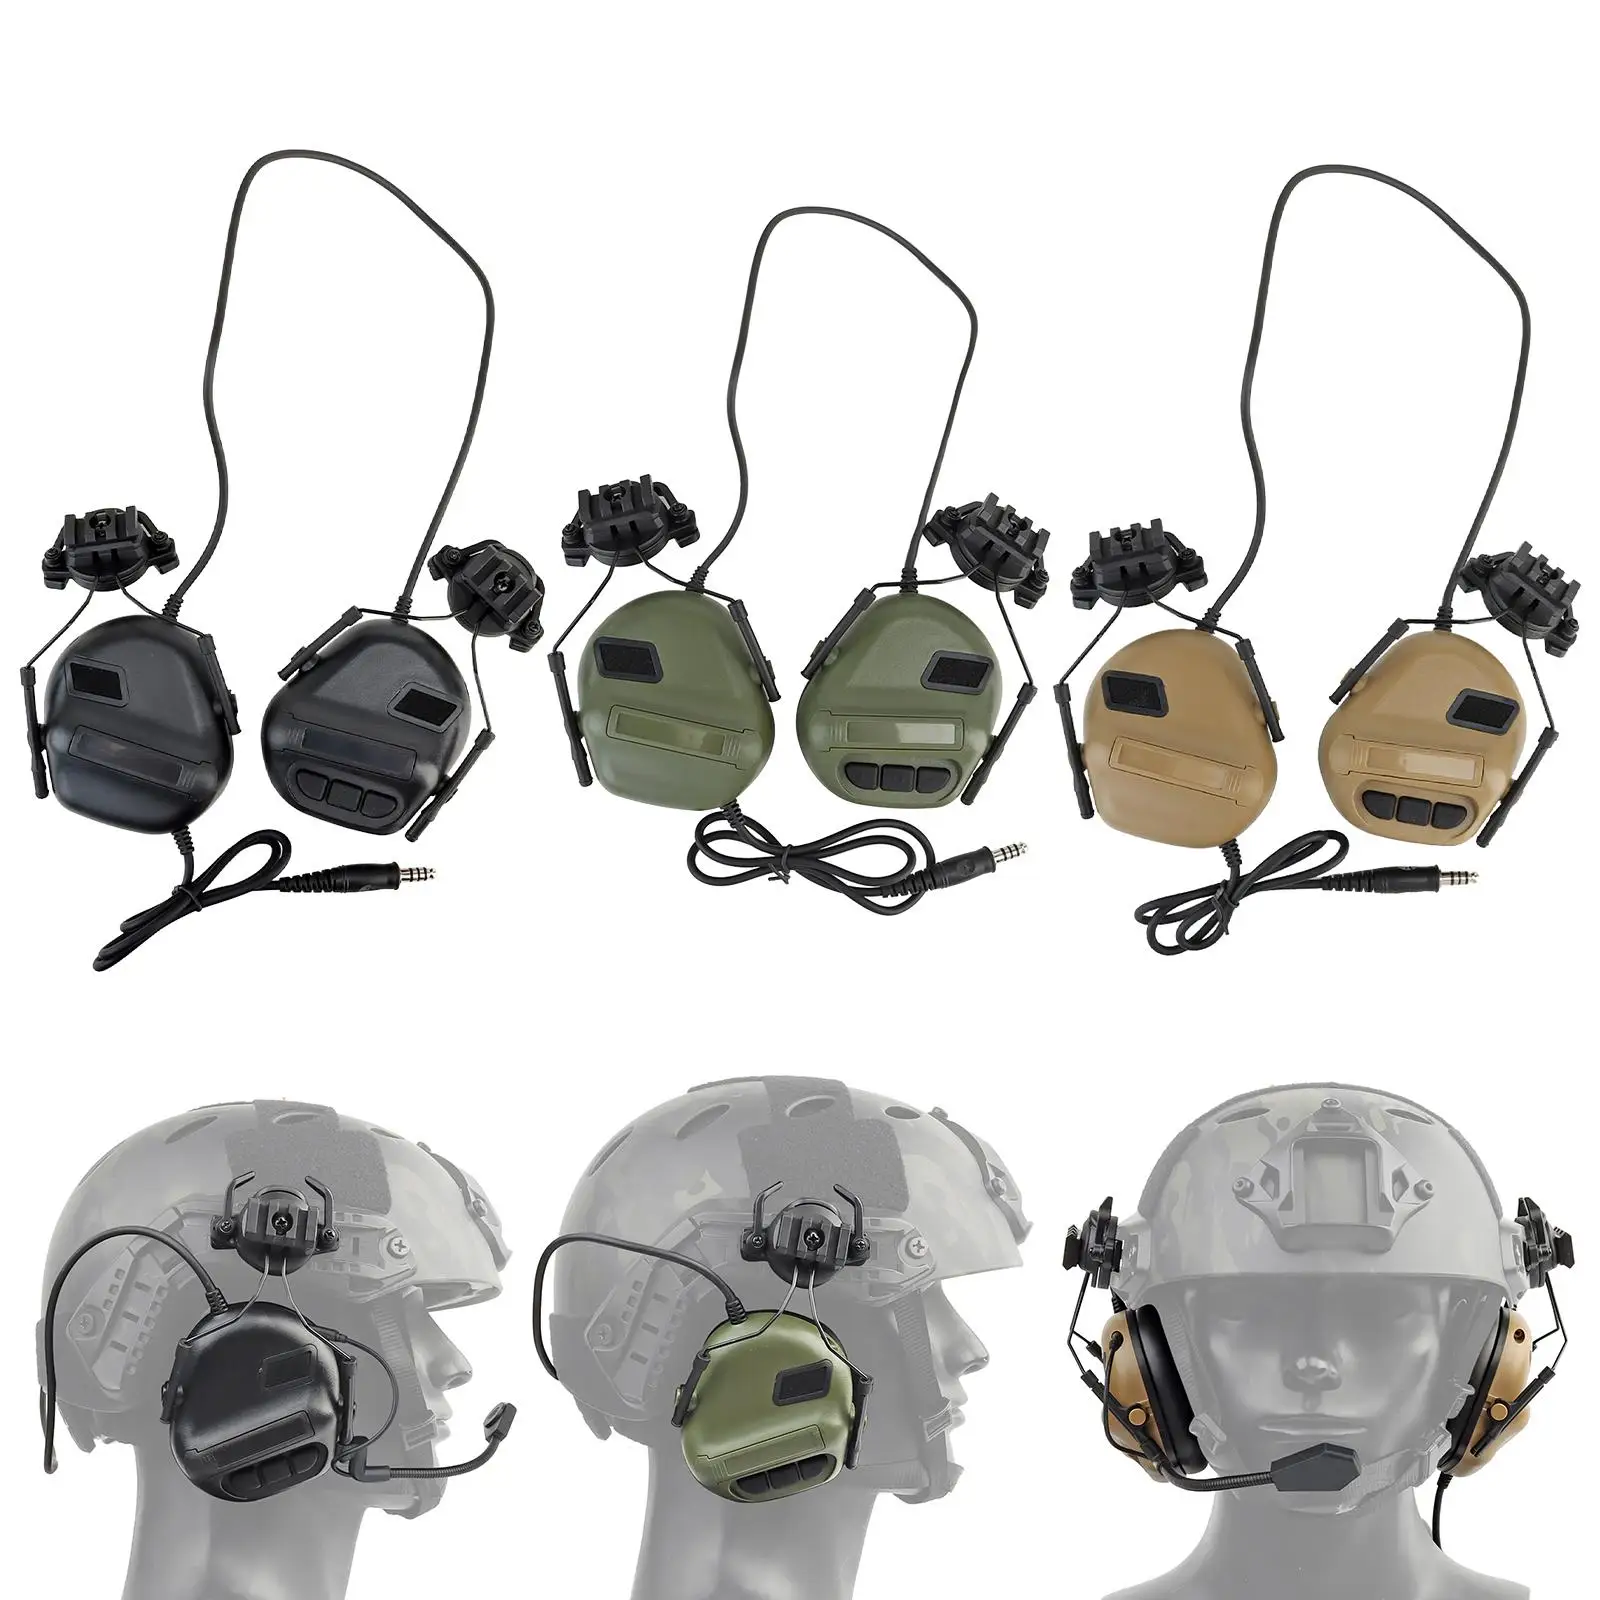 Electronic Ear Muffs Nrr 21dB Anti Noise Hearing Protection Snr 27dB Ear Defender for Team Activities Construction Mowing